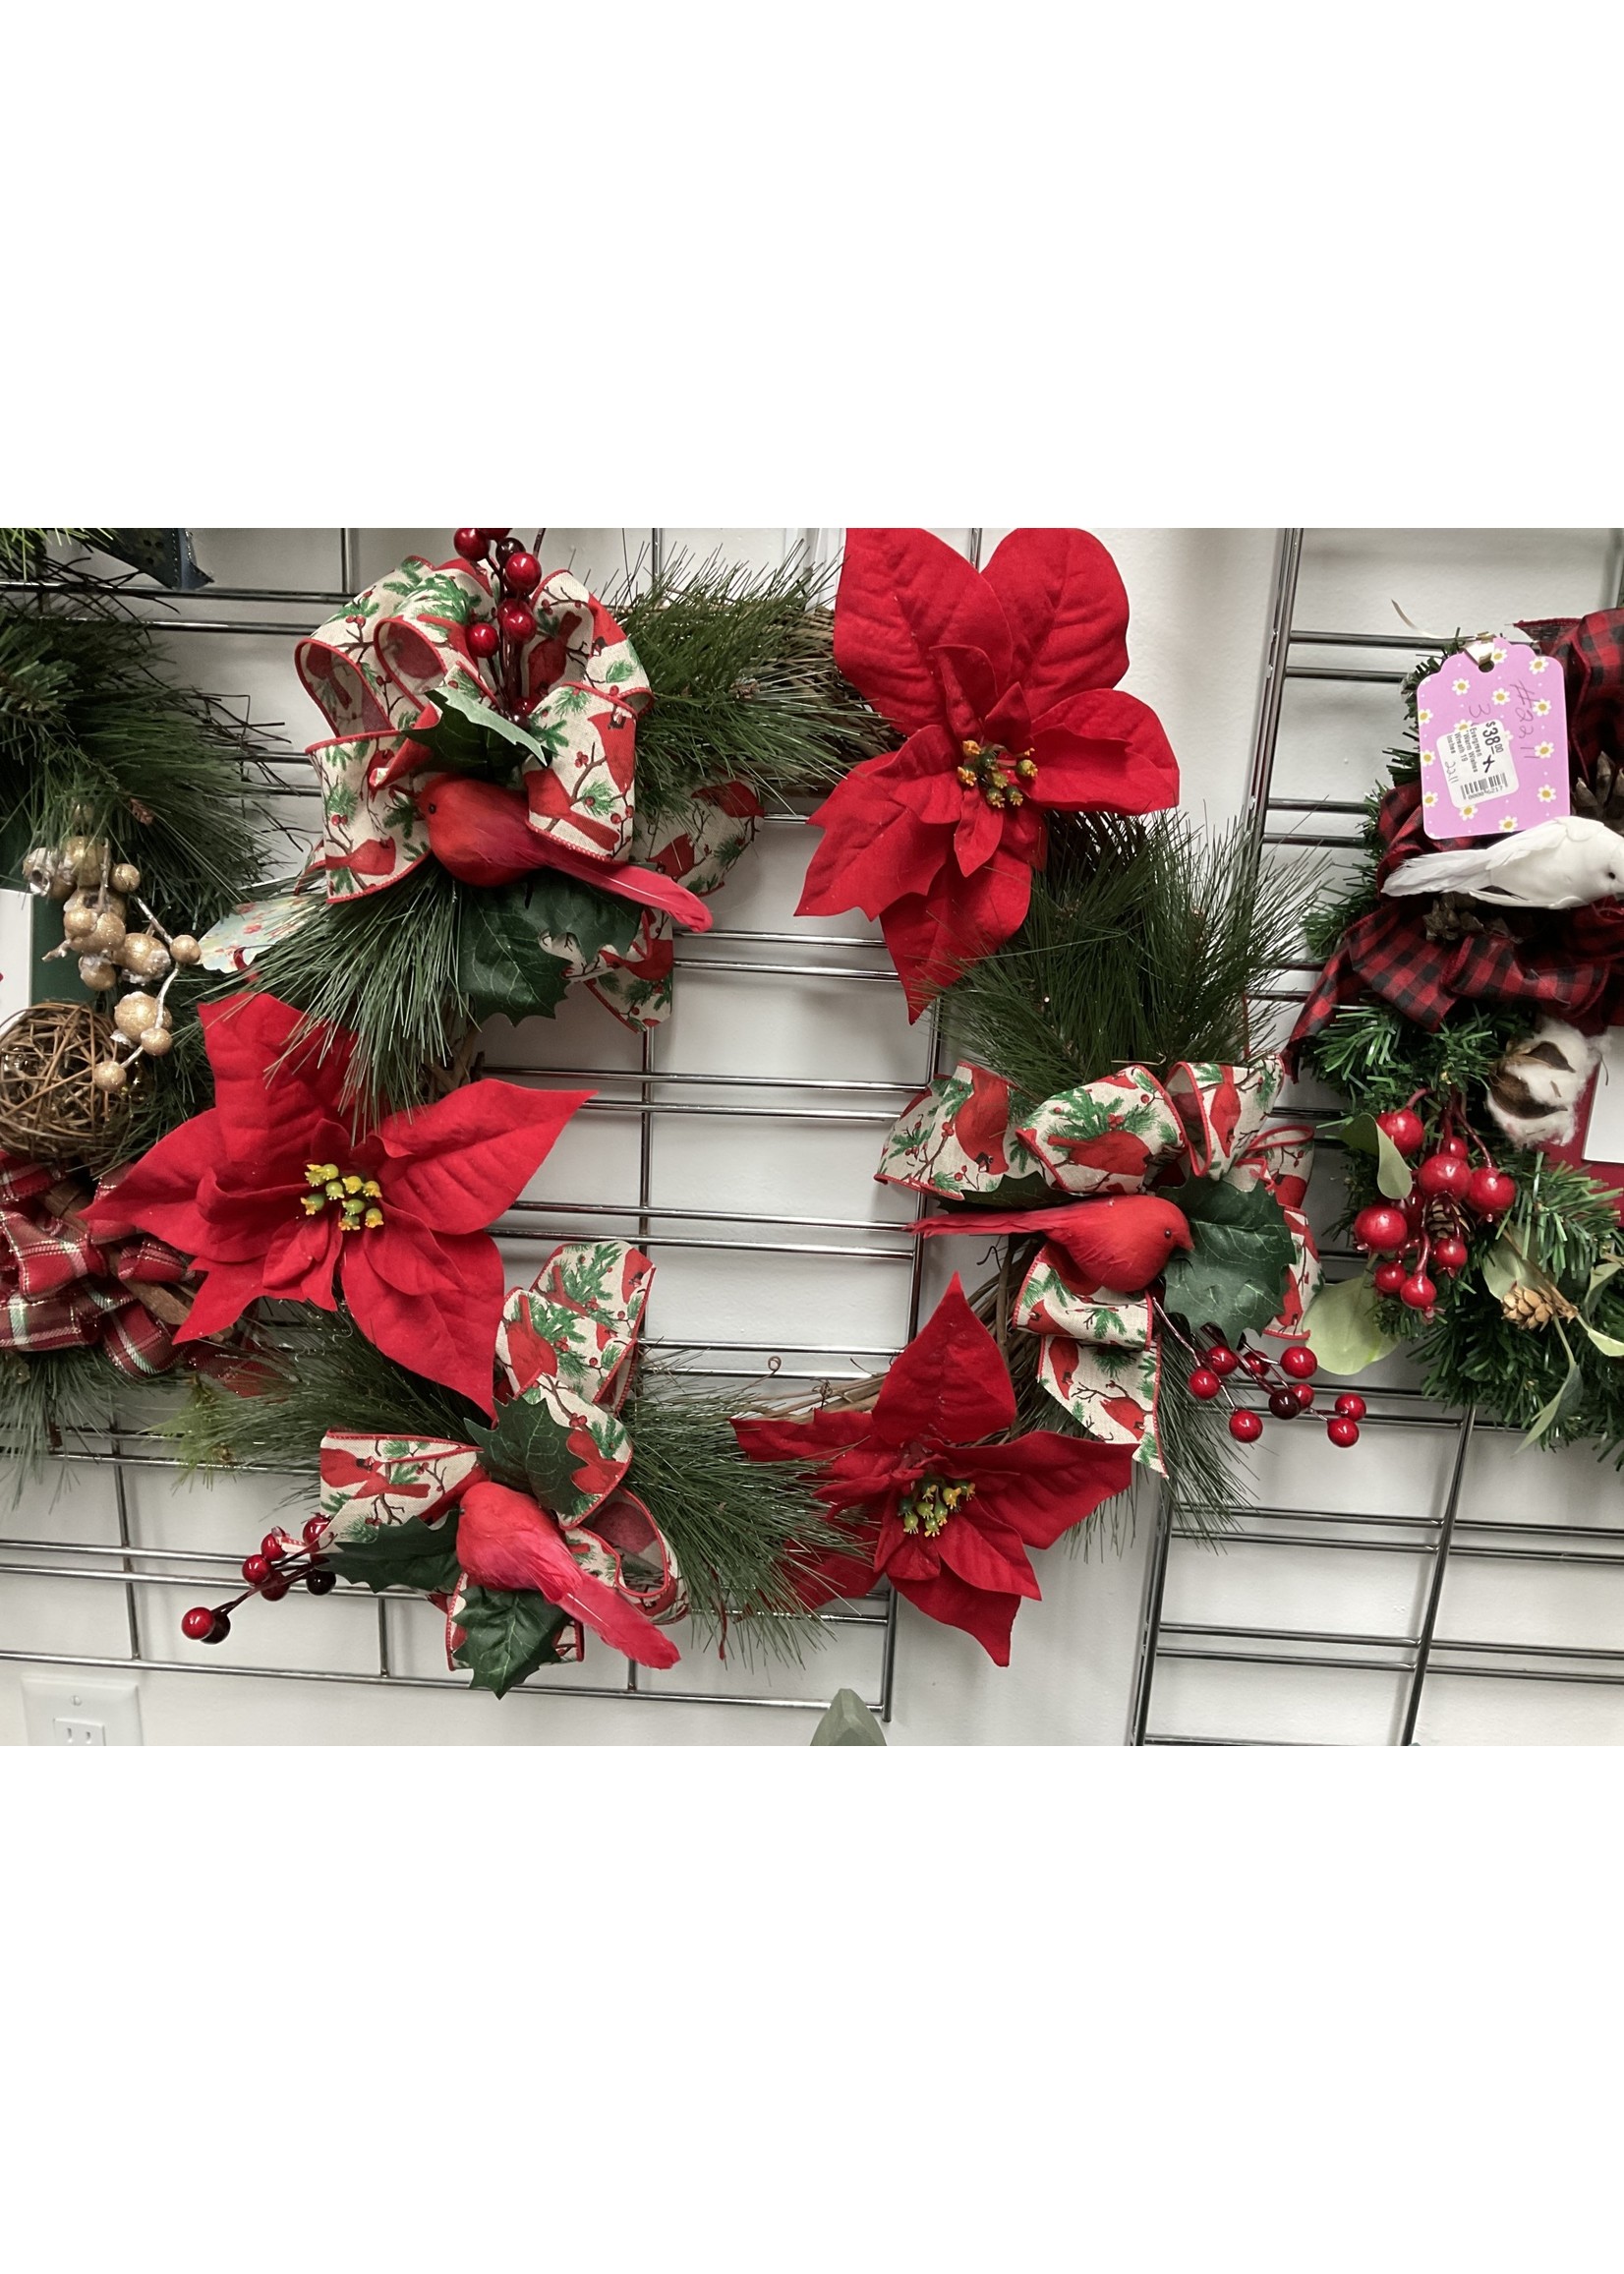 My New Favorite Thing Wreath Grapevine w Greenery, Cardinals, Poinsettias and Cardinal Ribbon 19 inches